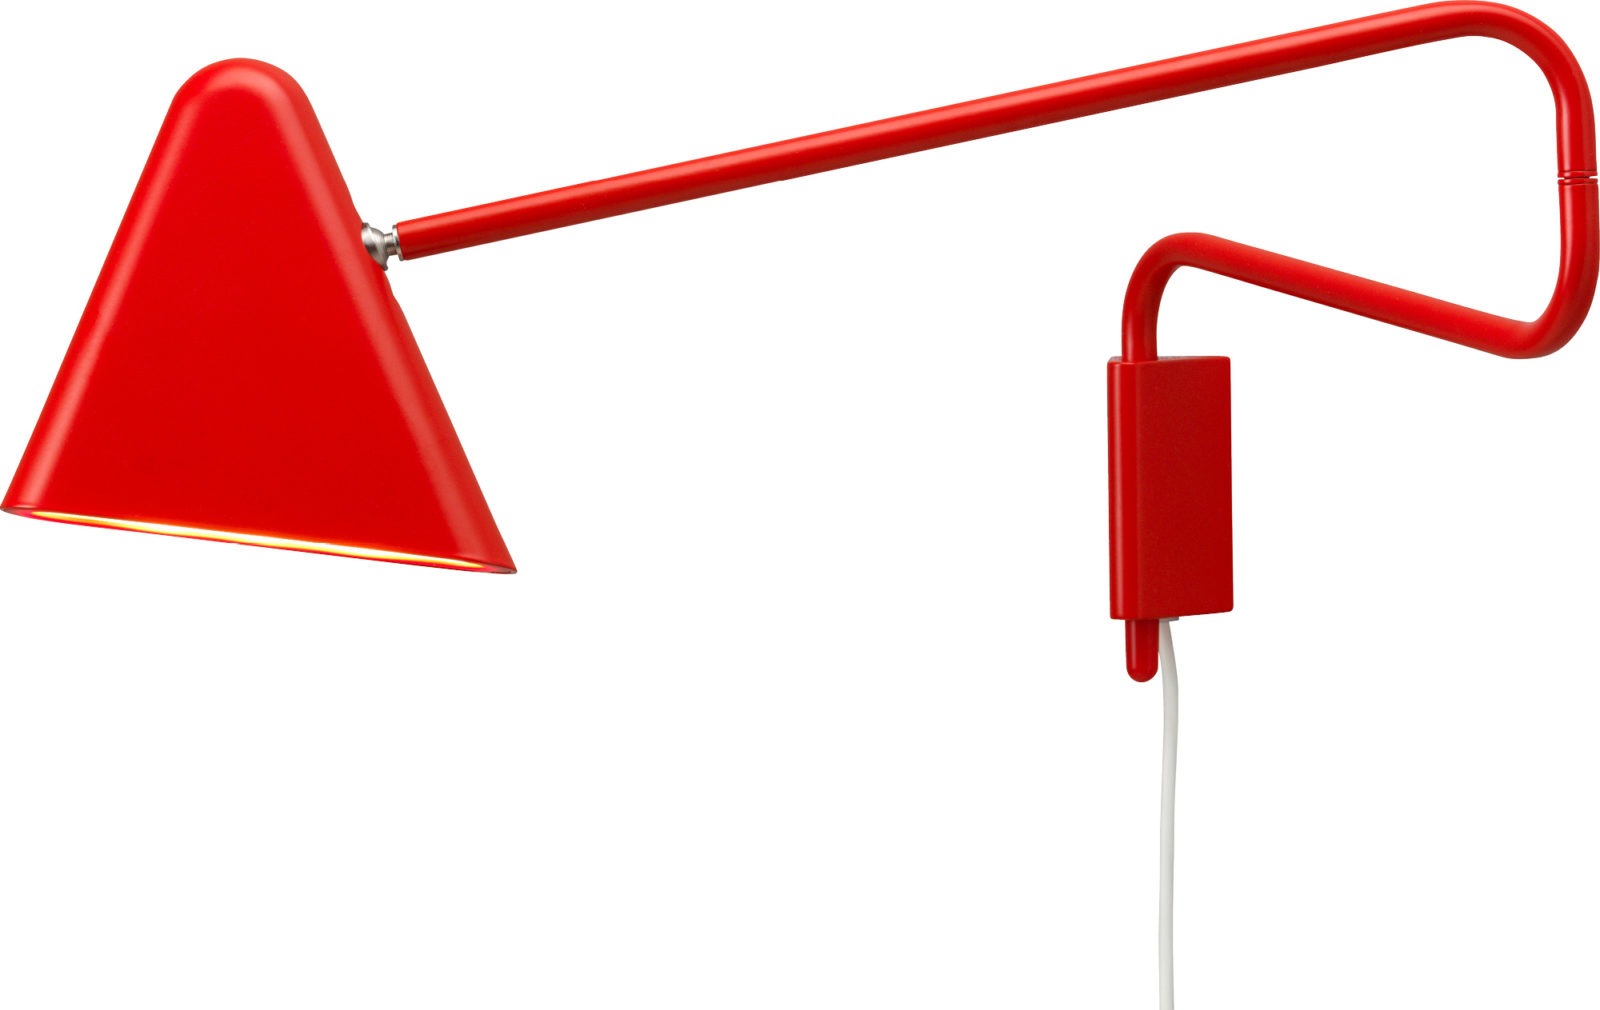 Red wall lamp with long, adjustable arm.